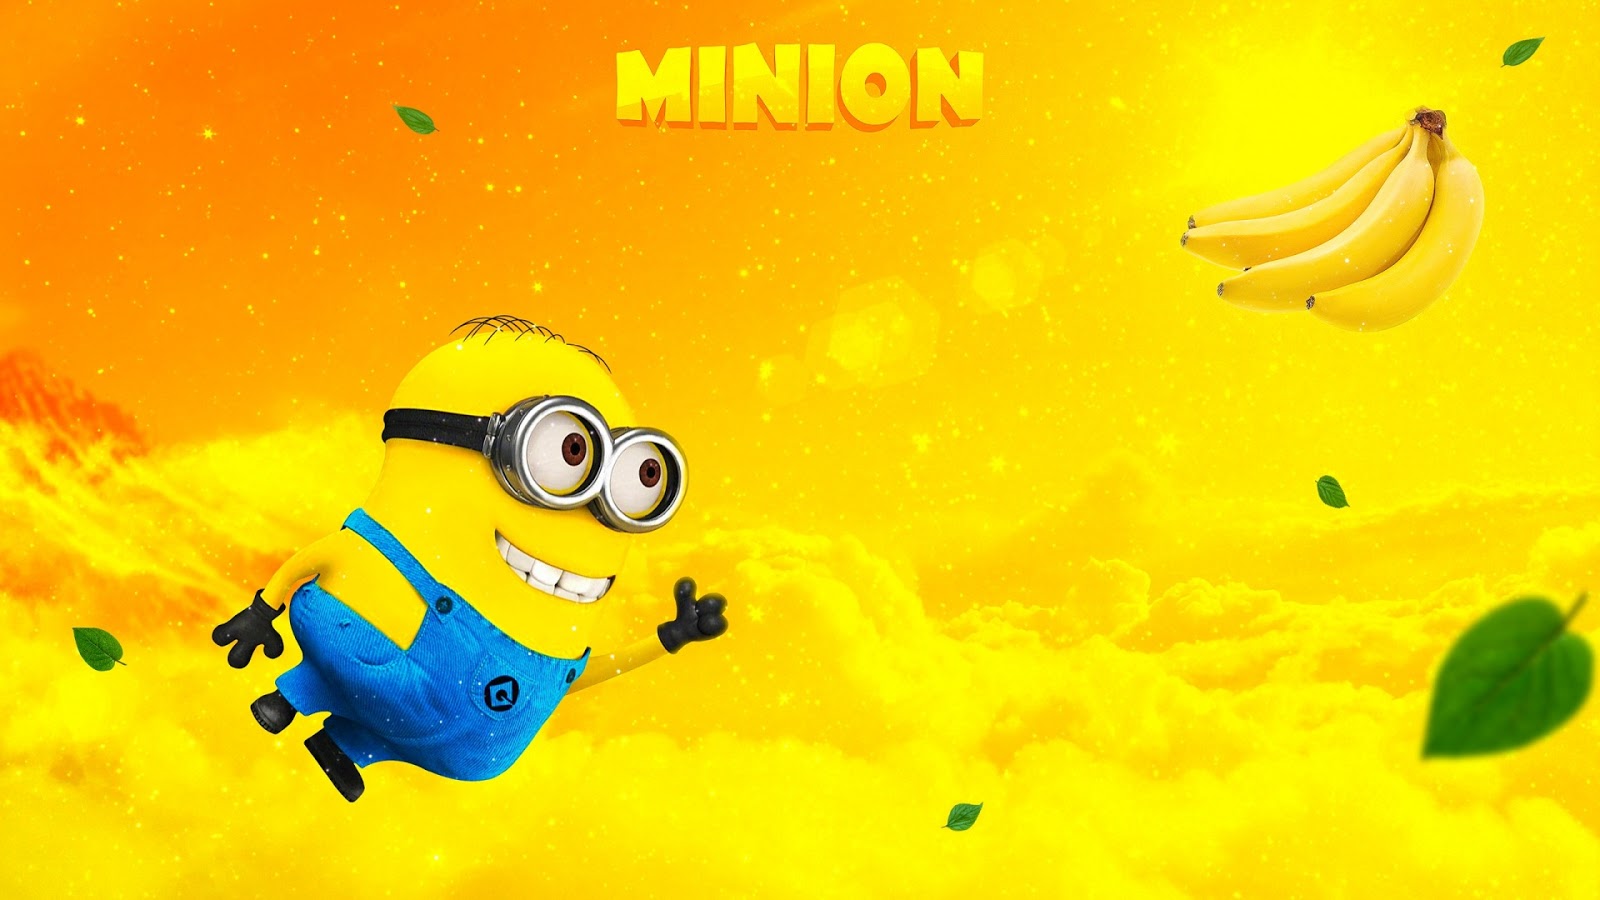 100+] Cute Minion Wallpapers | Wallpapers.com